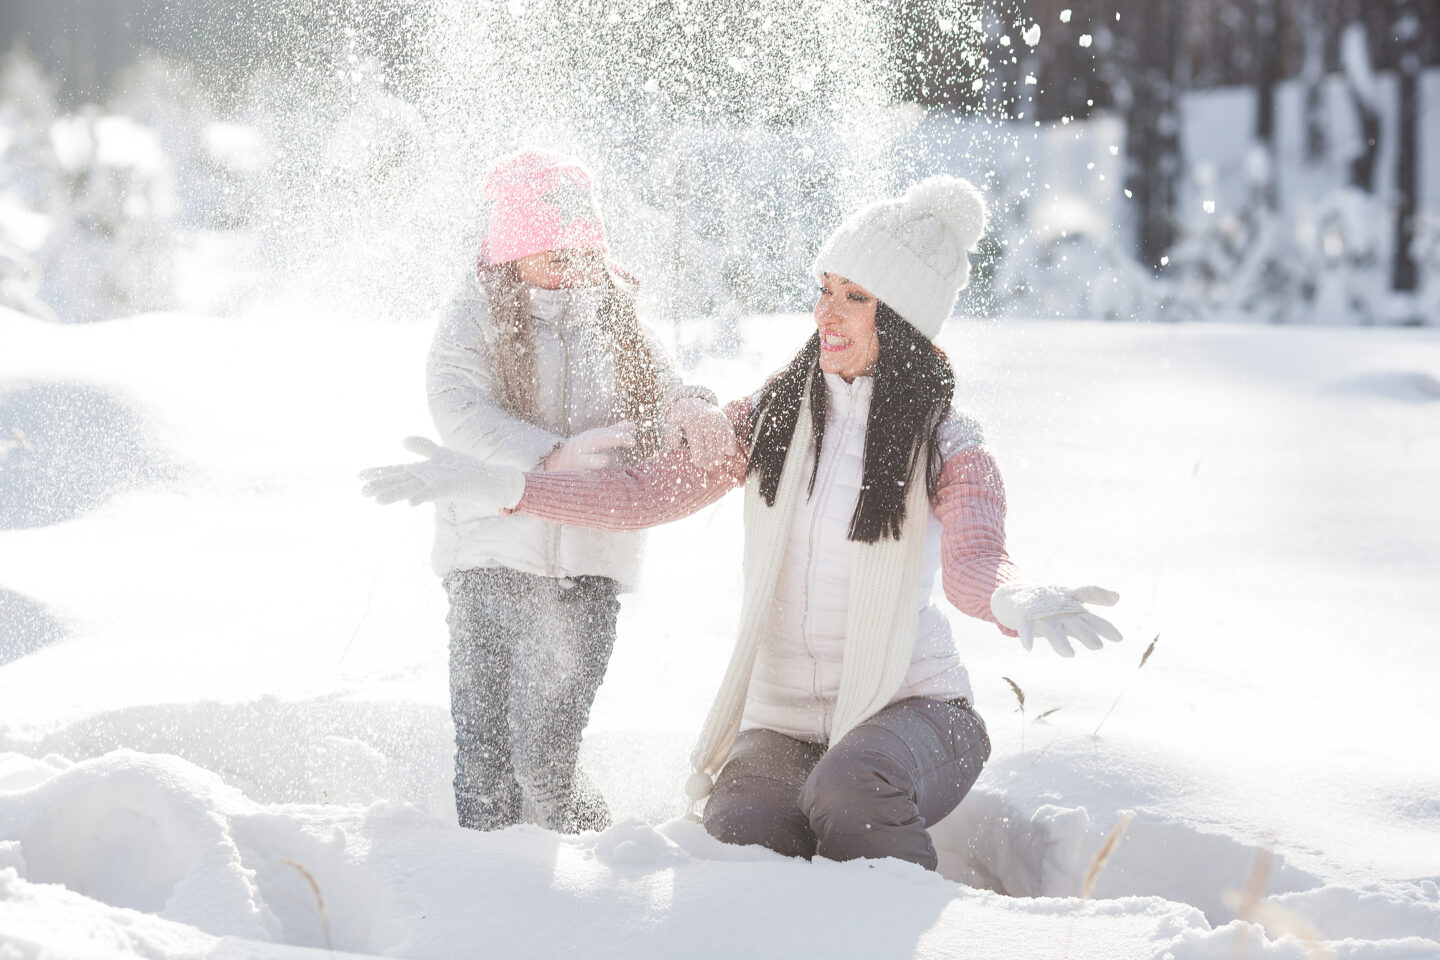 100+ Exciting Indoor & Outdoor Things To Do In Winter For Fun